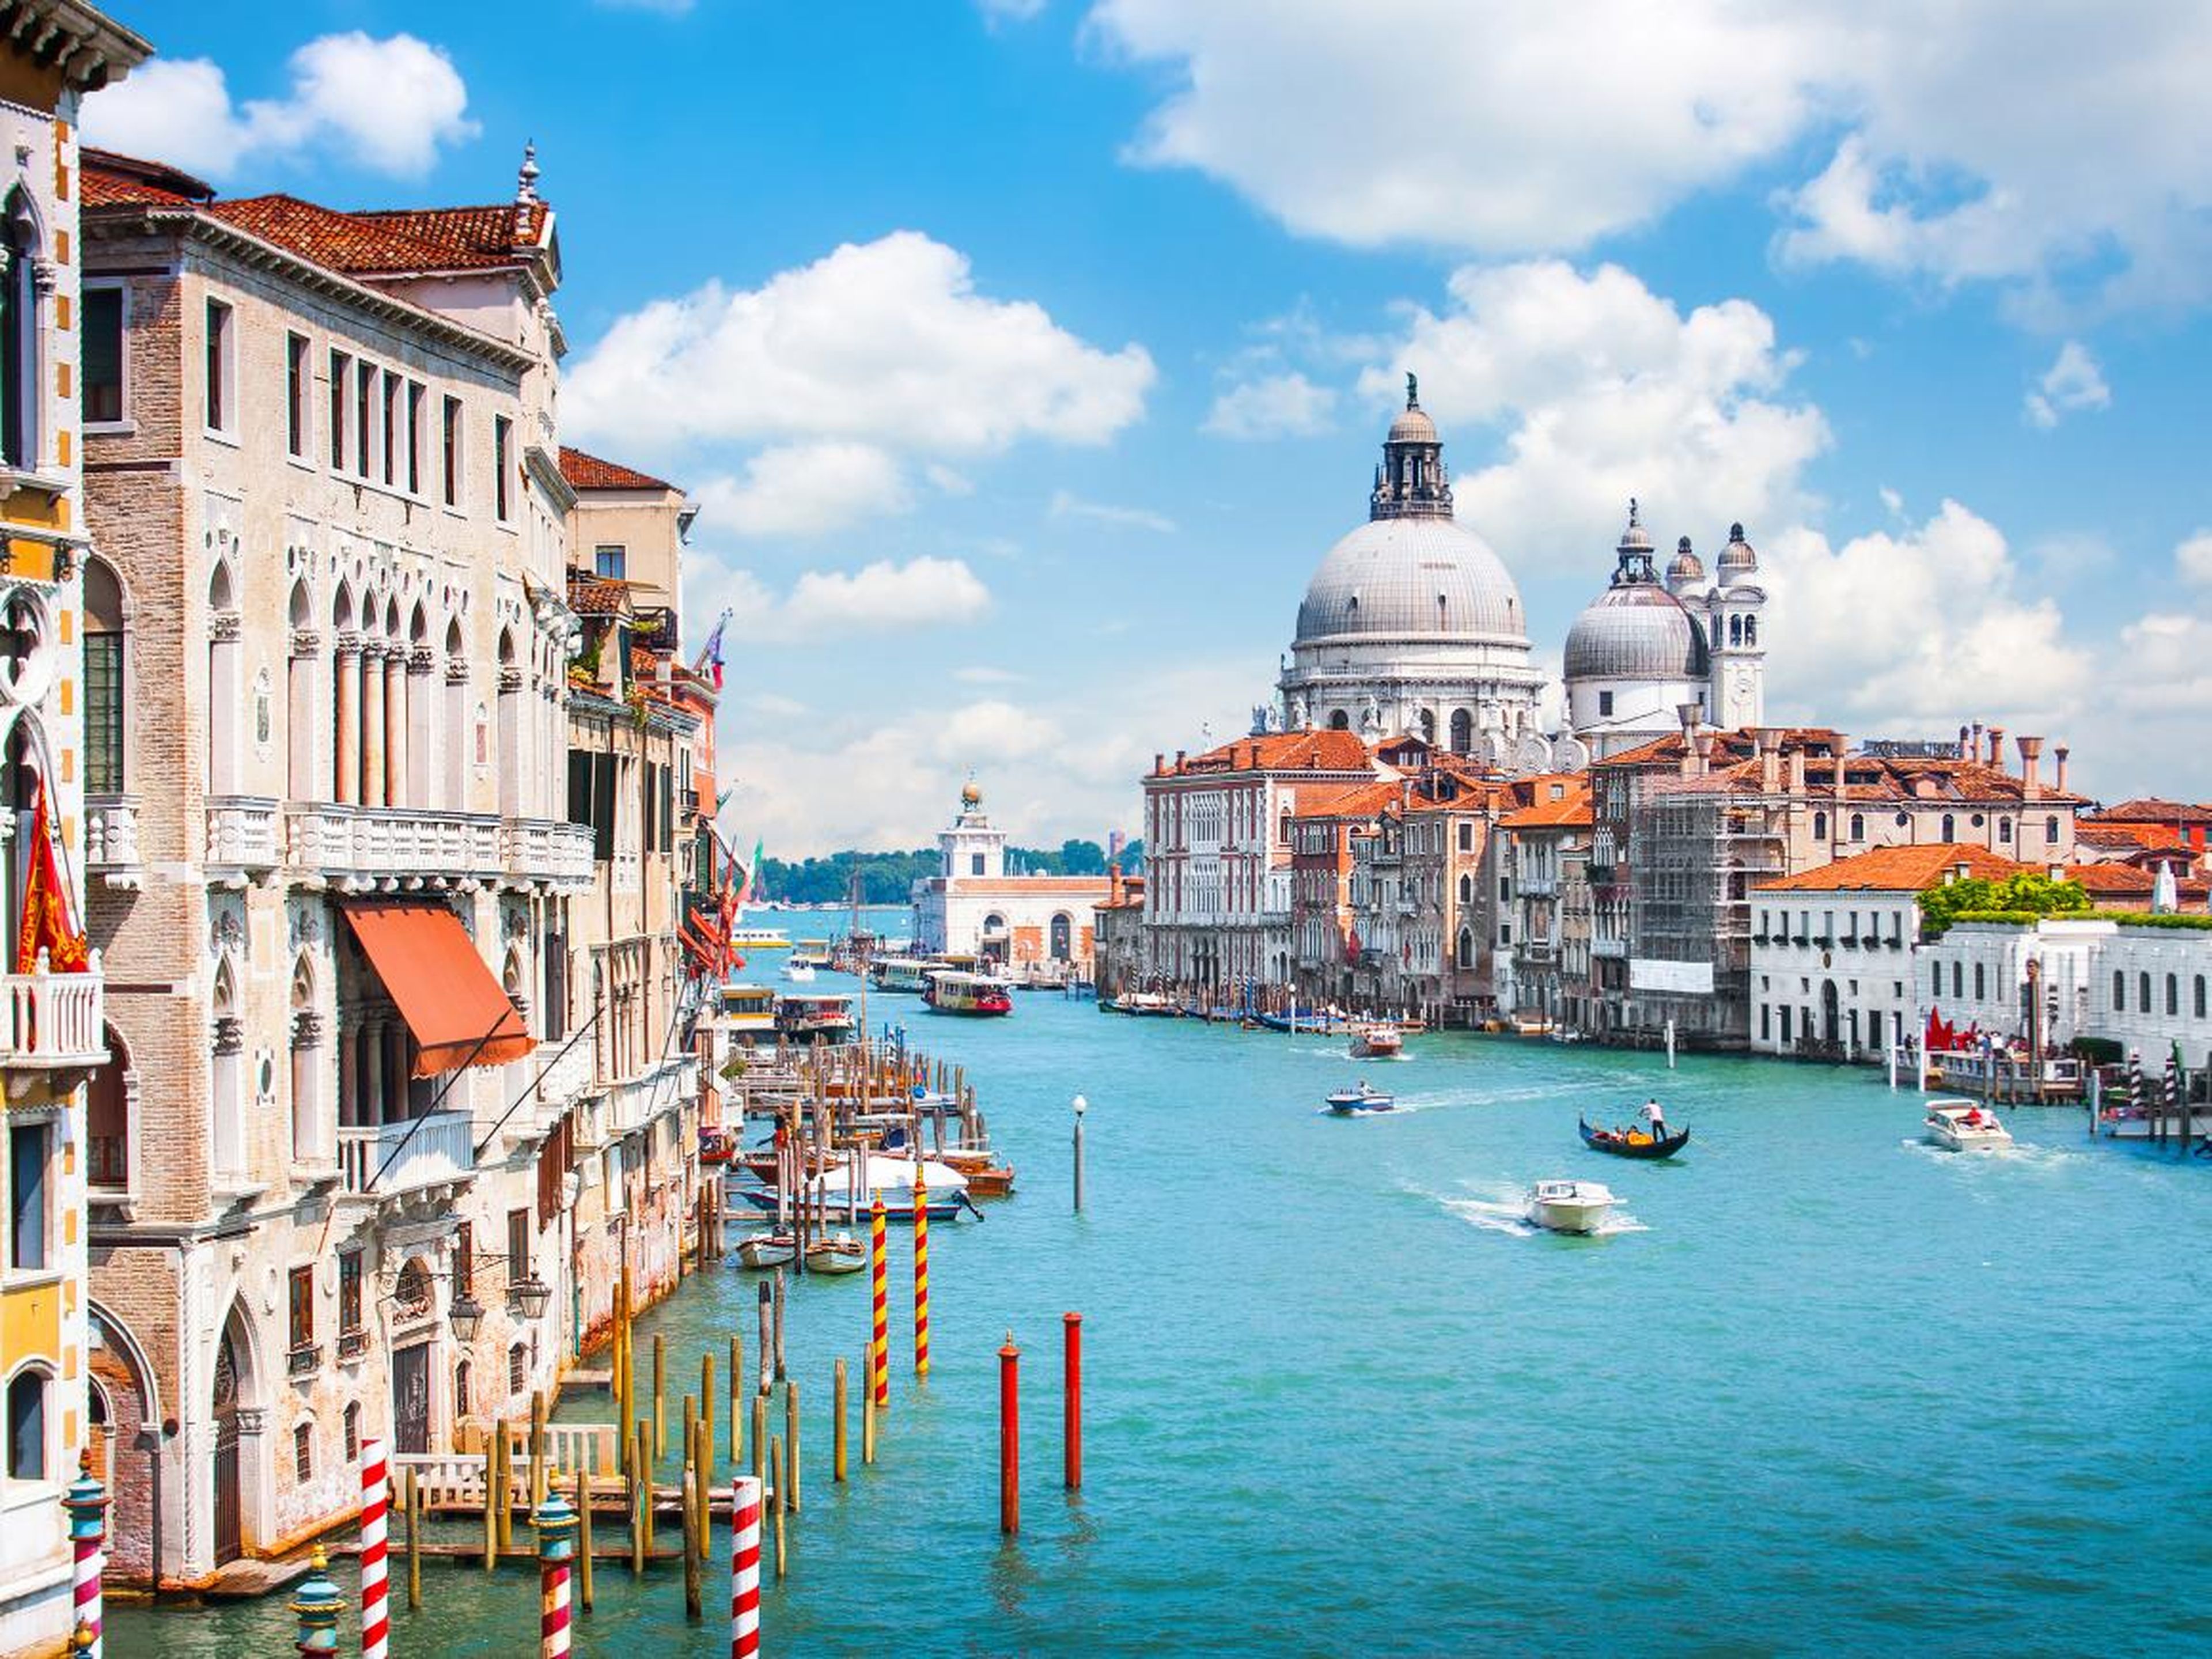 Venice, a city on Italy's northeastern coast, is one of the country's most popular destinations.